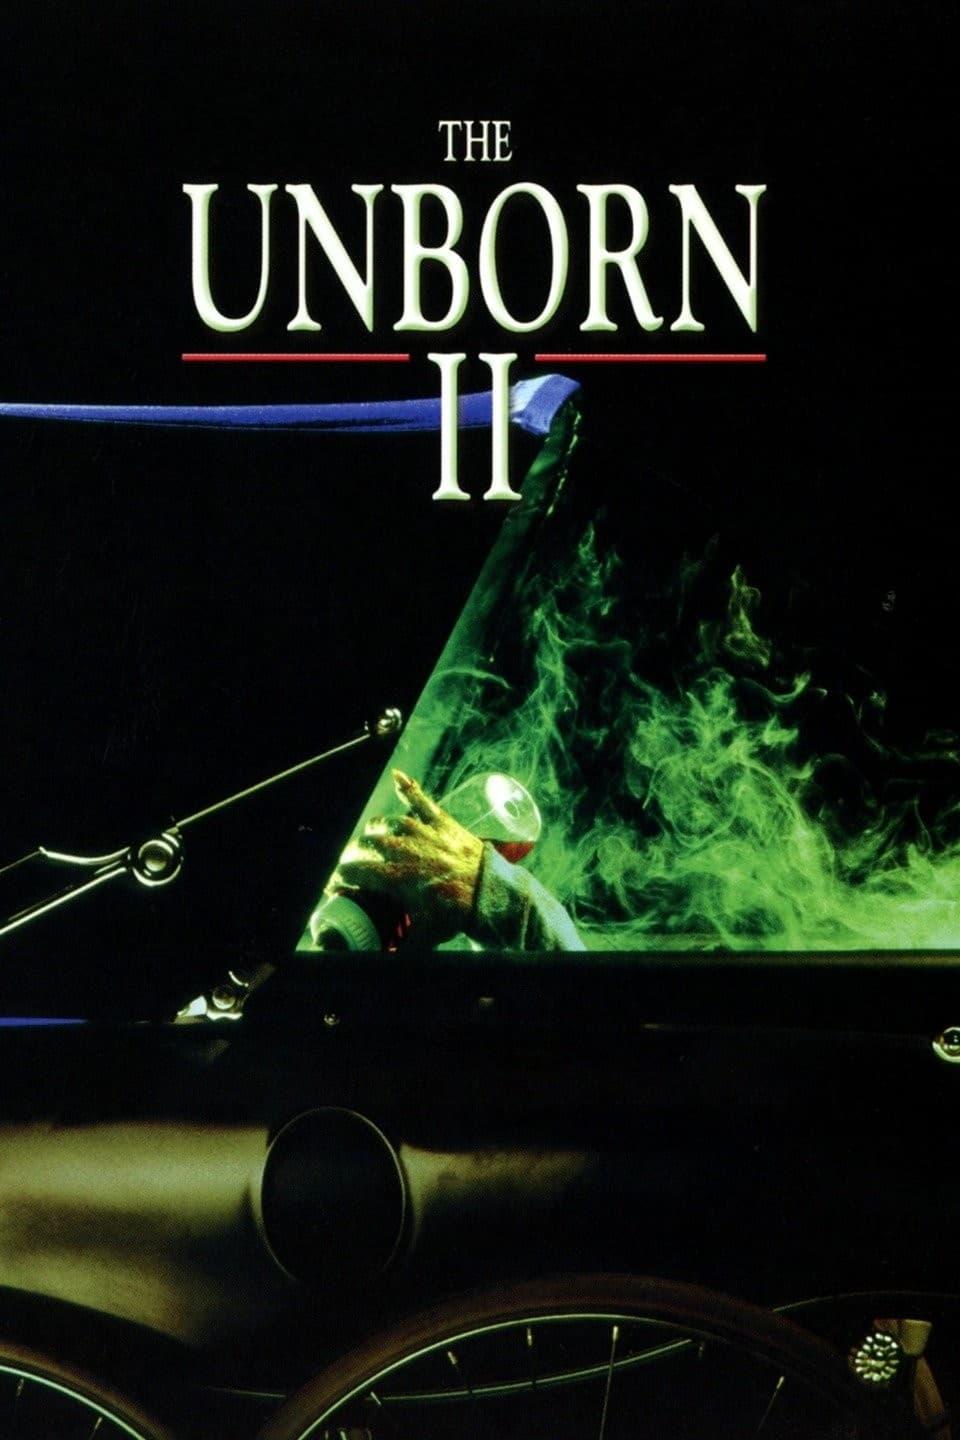 The Unborn II poster